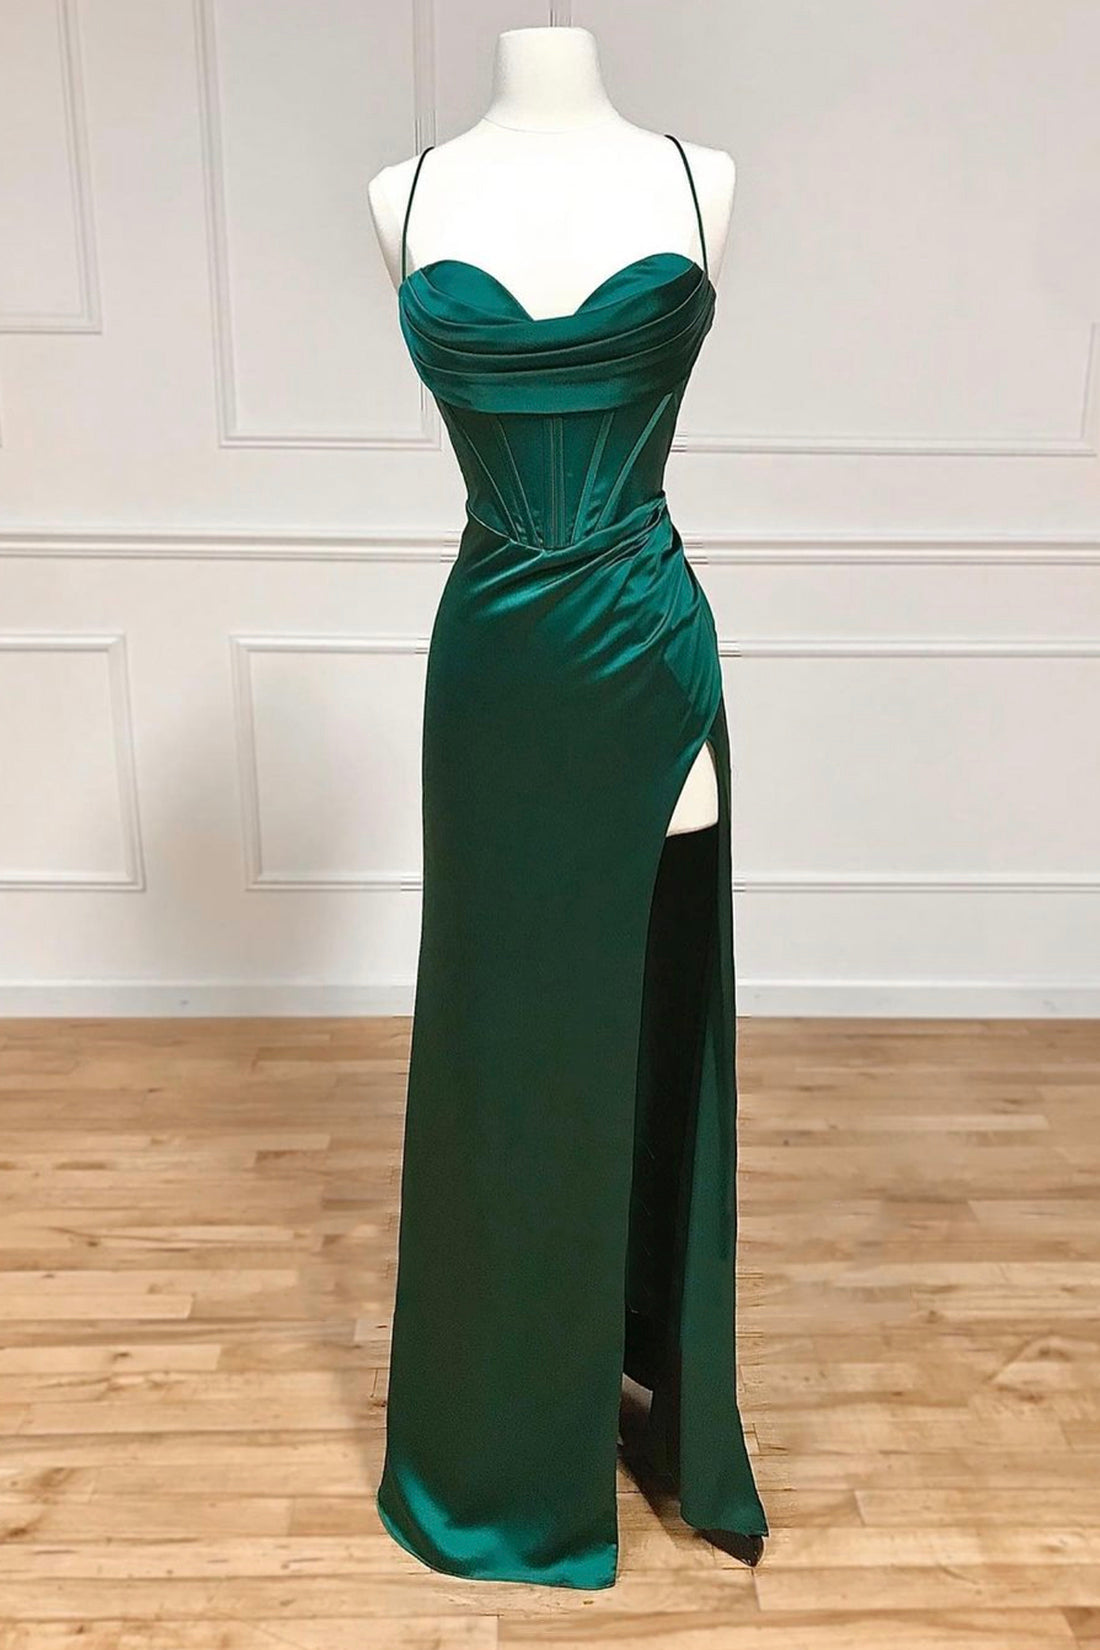 Green Satin Long Prom Dress Outfits For Girls, Simple Lace-Up Evening Party Dress